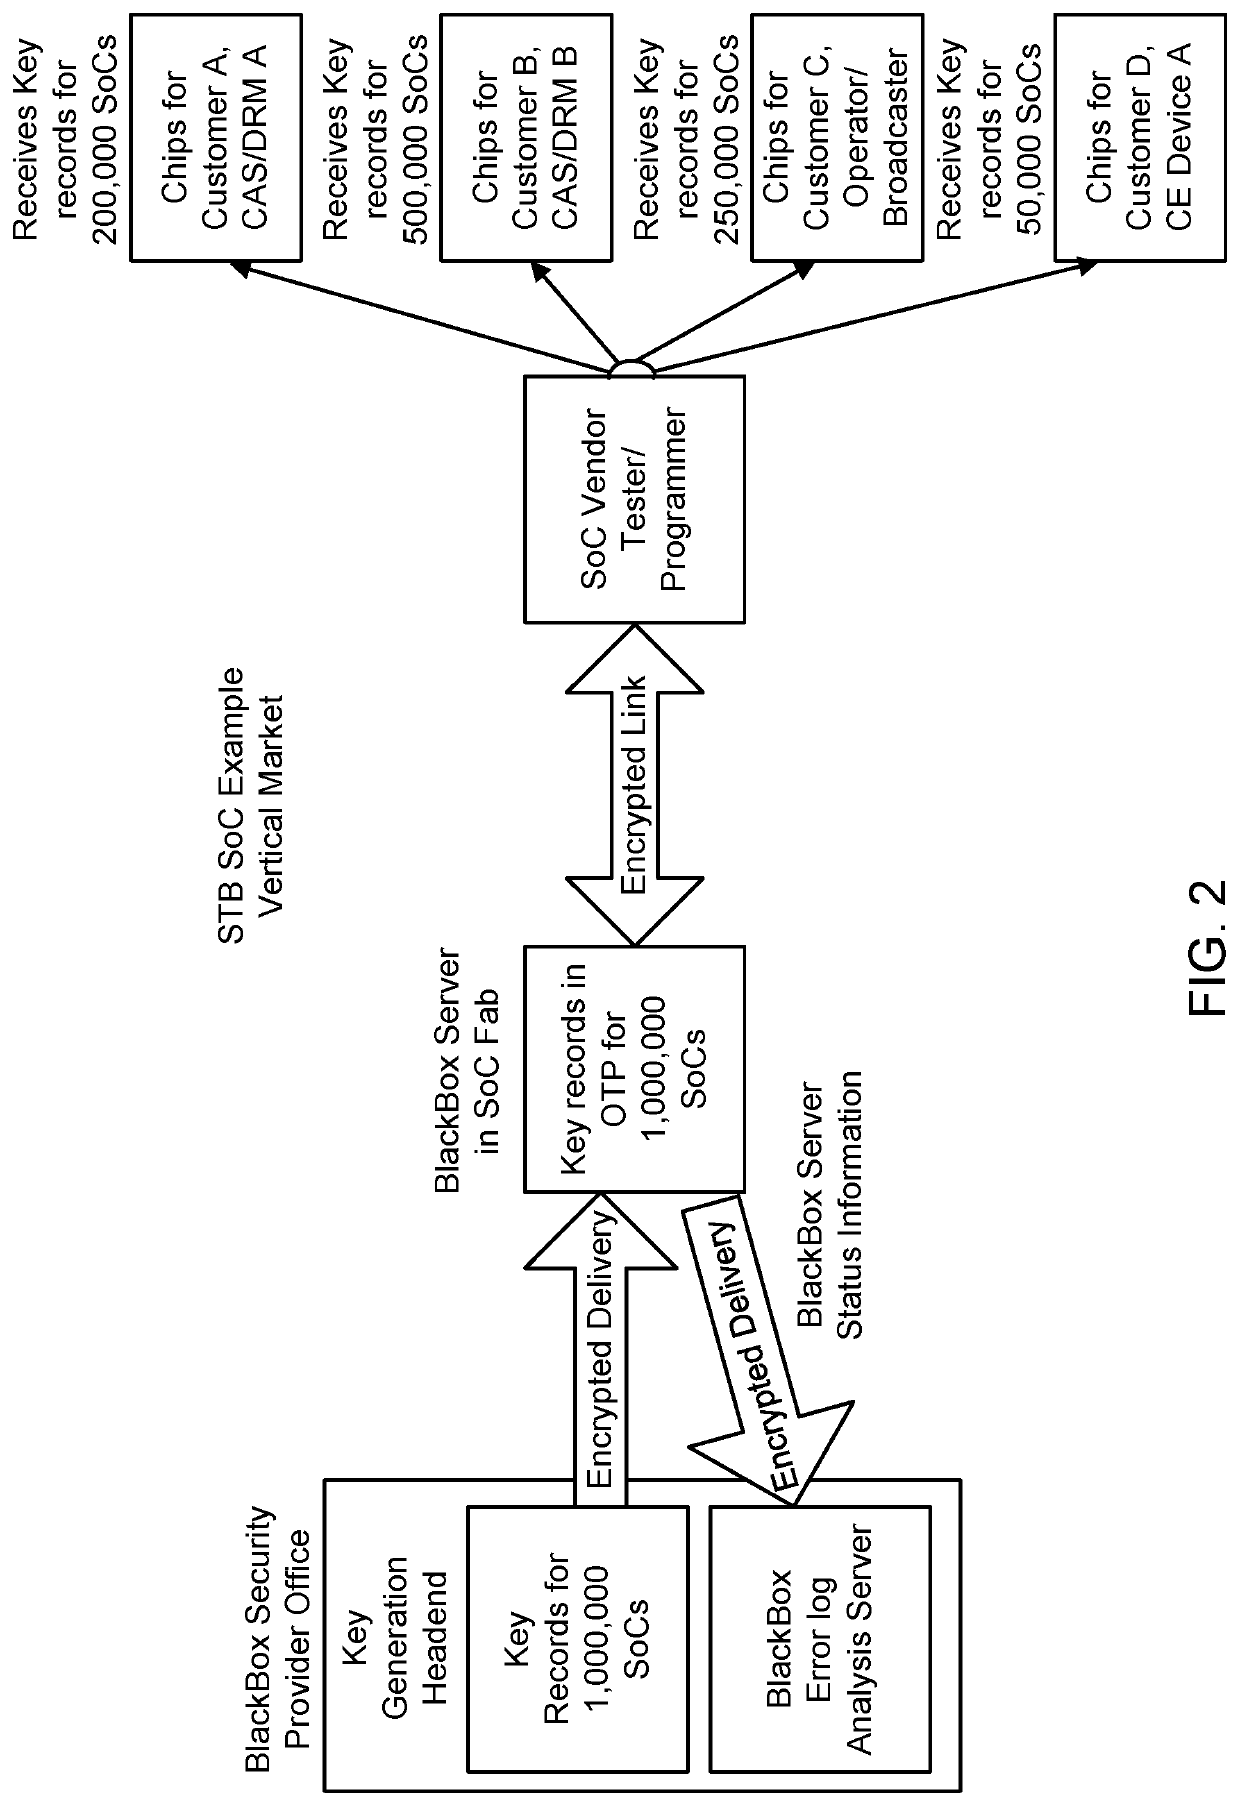 Method and apparatus for a blackbox programming system permitting downloadable applications and multiple security profiles providing hardware separation of services in hardware constrained devices